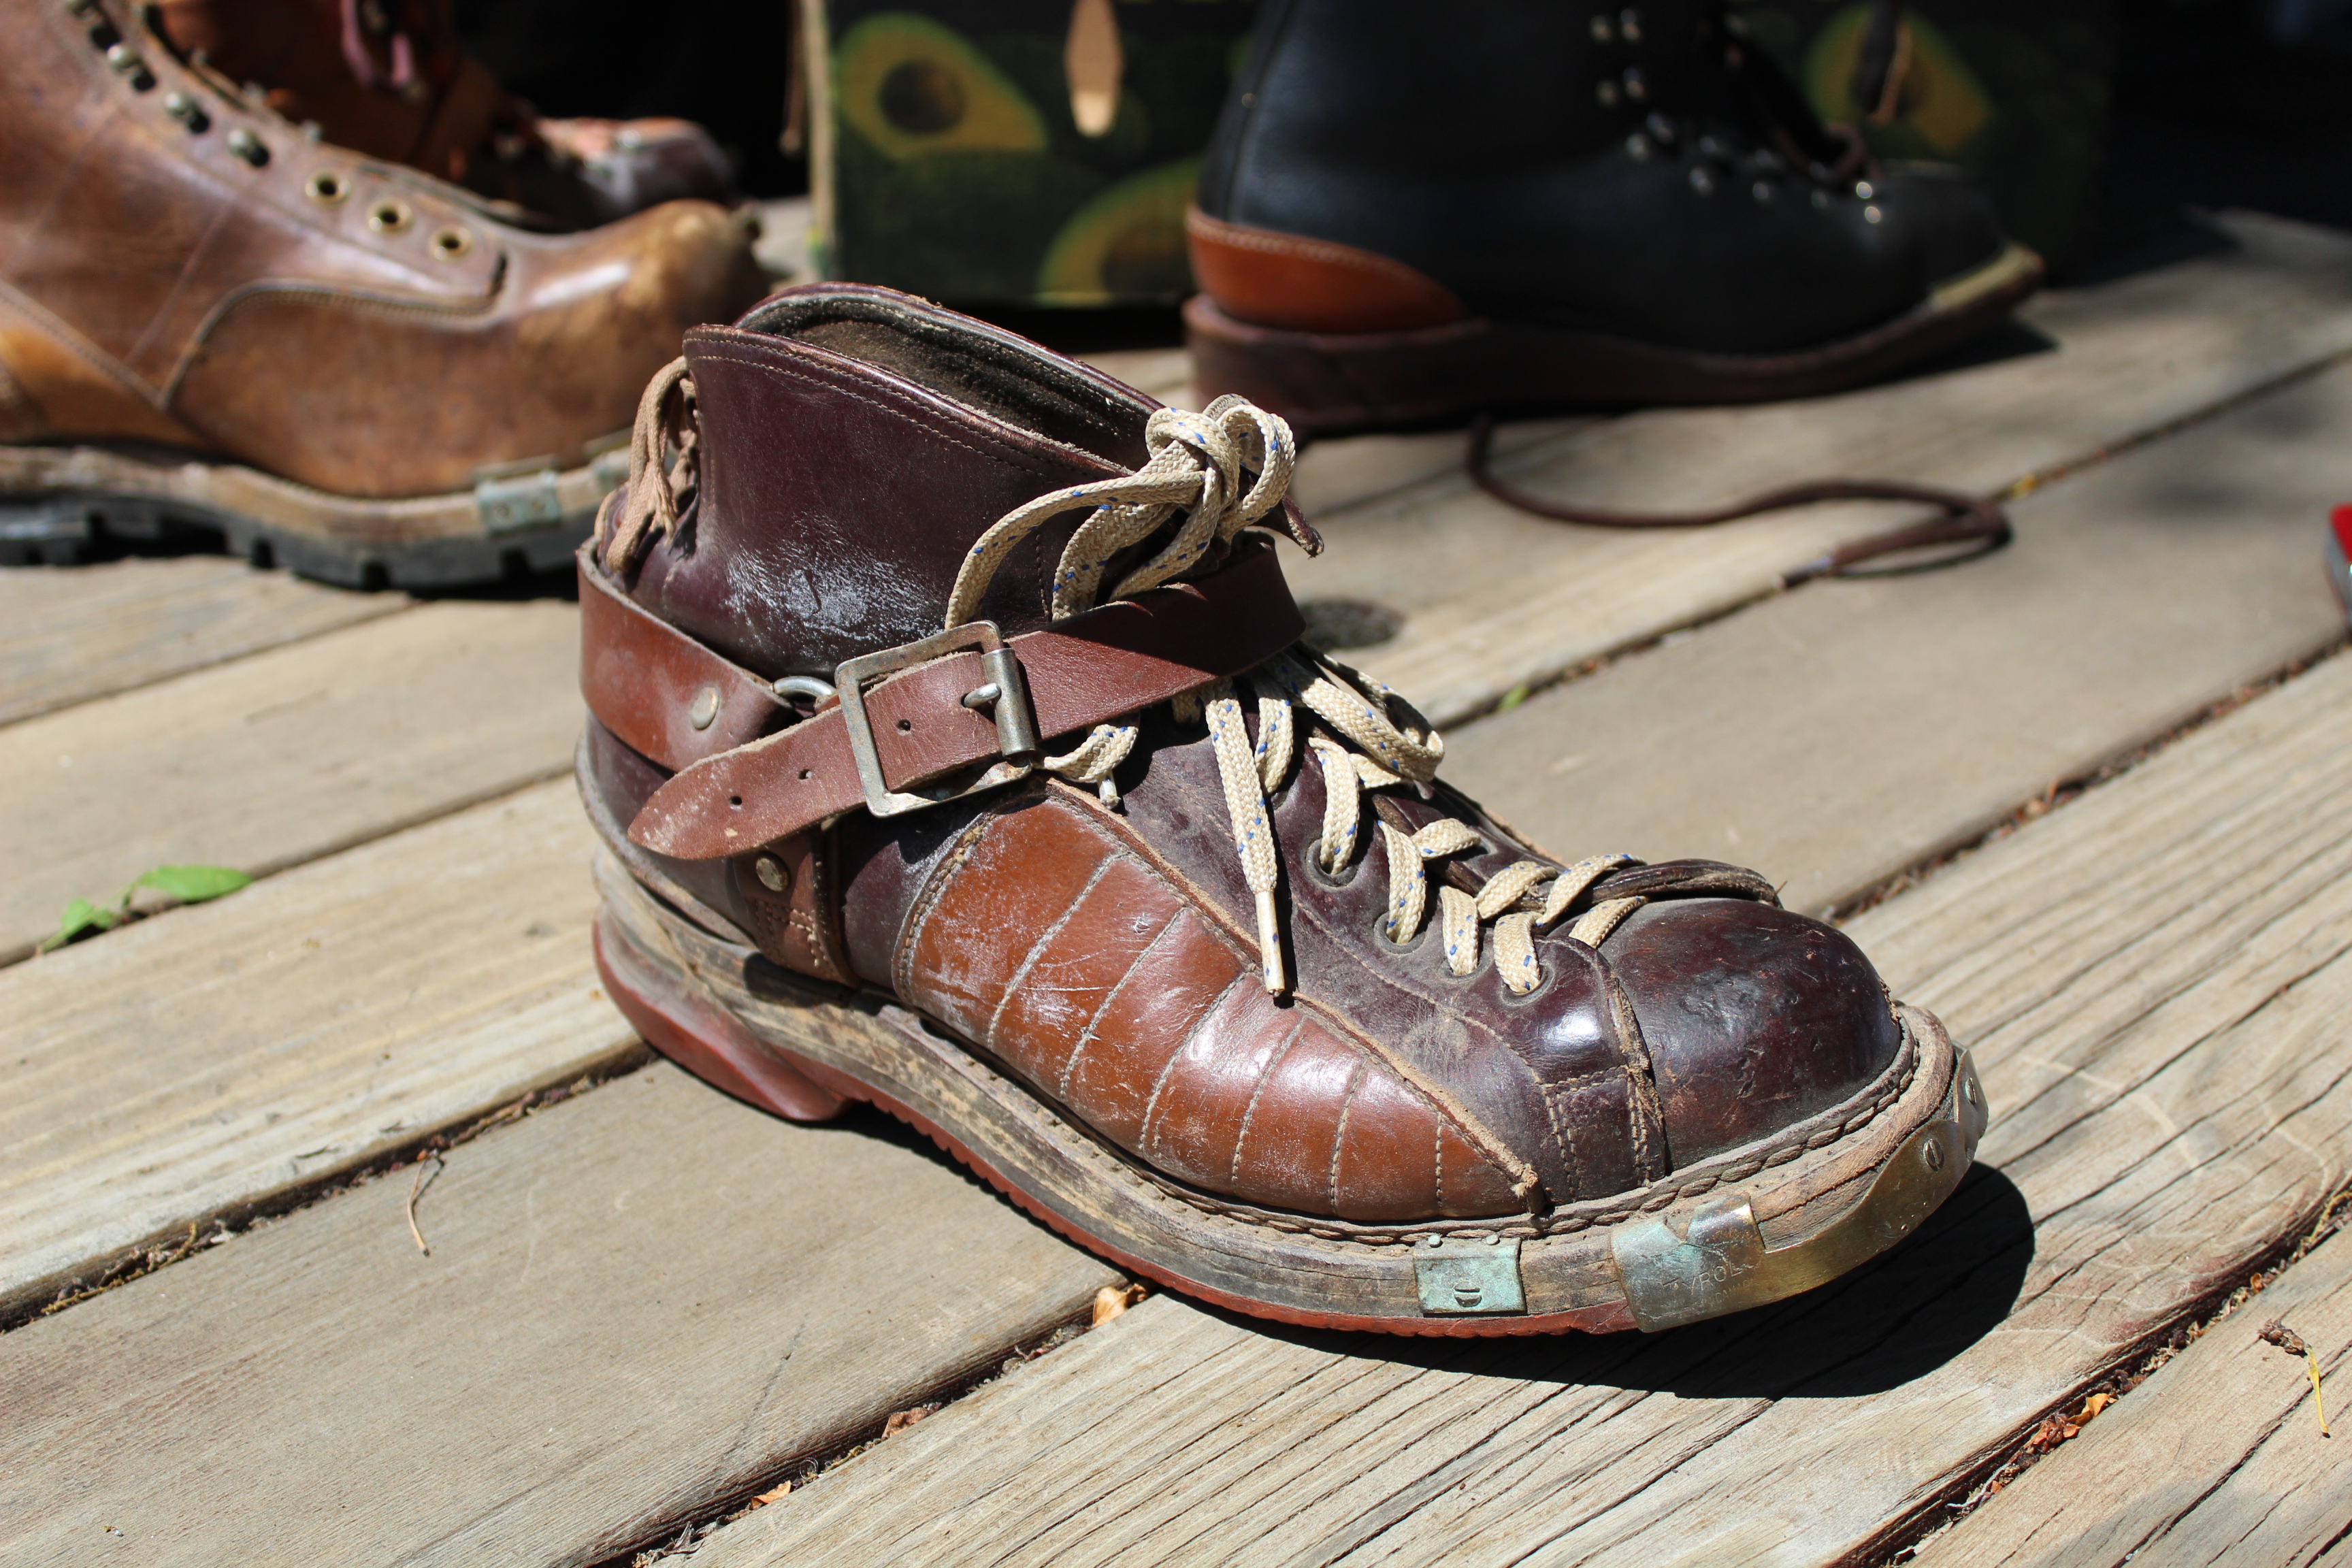 Mass-produced alpine boot with instep strap